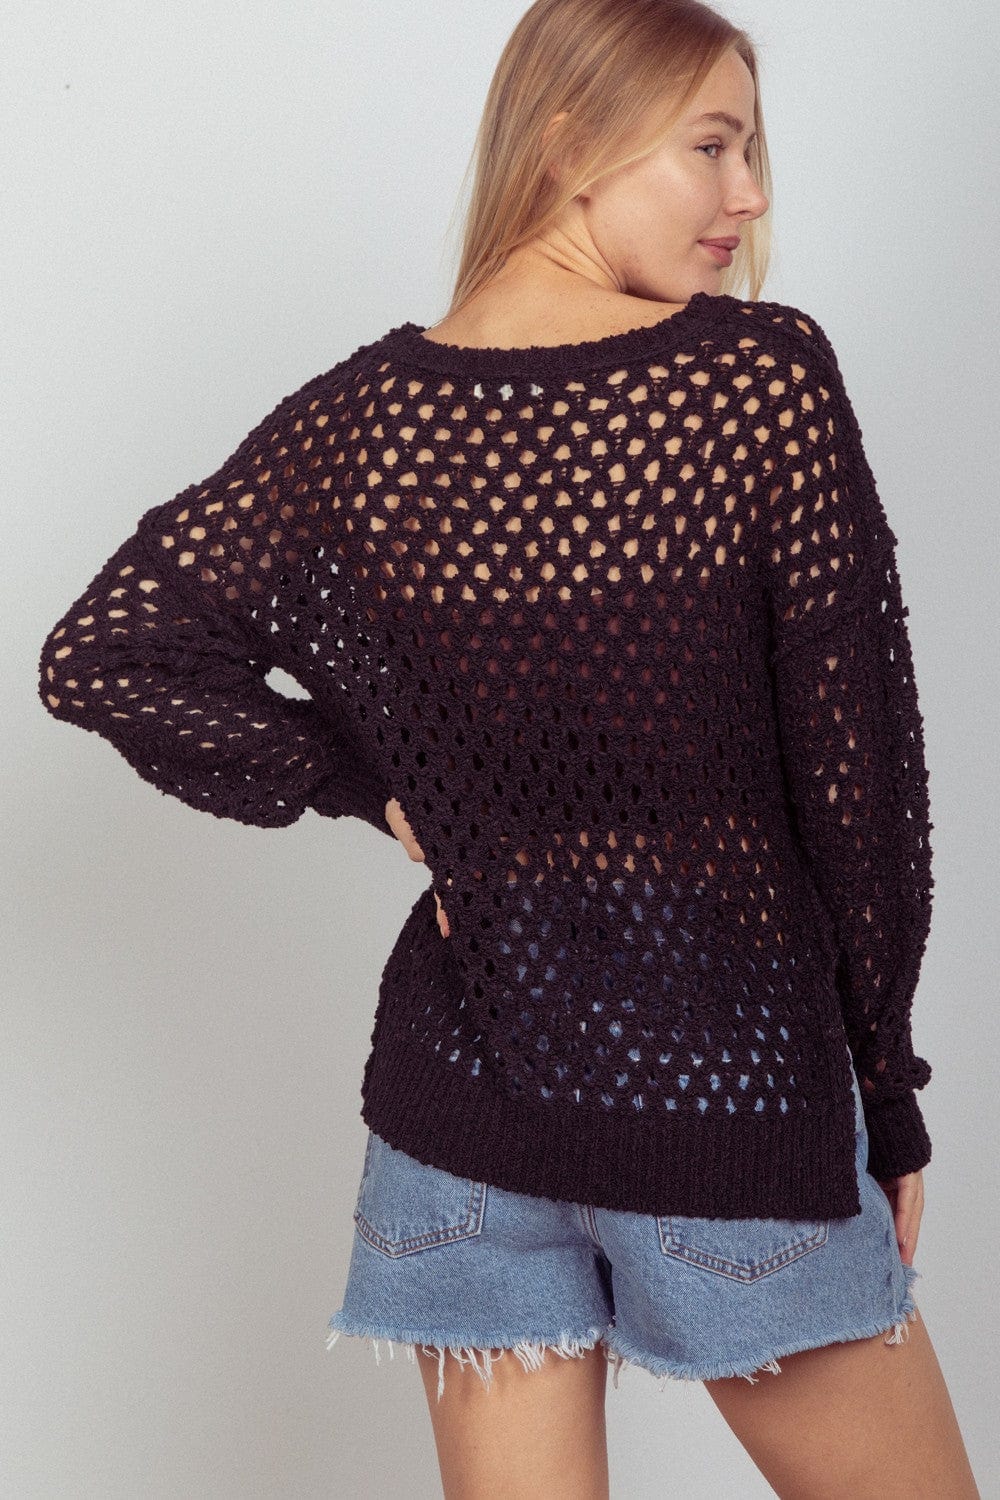 A knit cover-up by Unique Kulture featuring a stylish slit design, perfect for layering over swimwear or casual outfits."